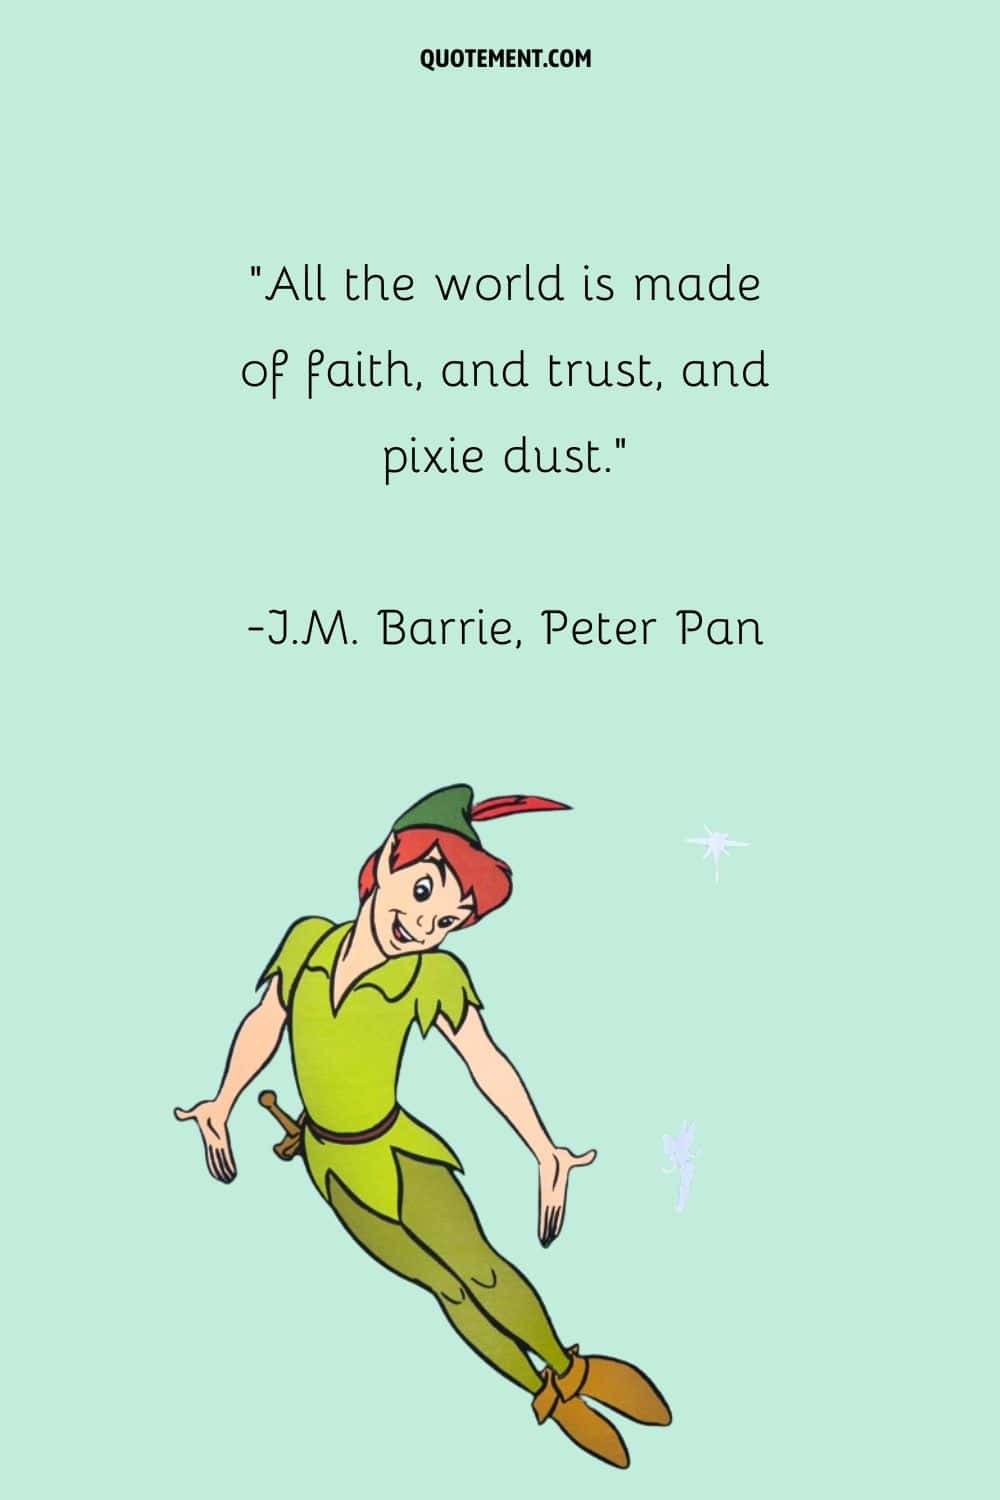 “All the world is made of faith, and trust, and pixie dust.” ― J.M. Barrie, Peter Pan